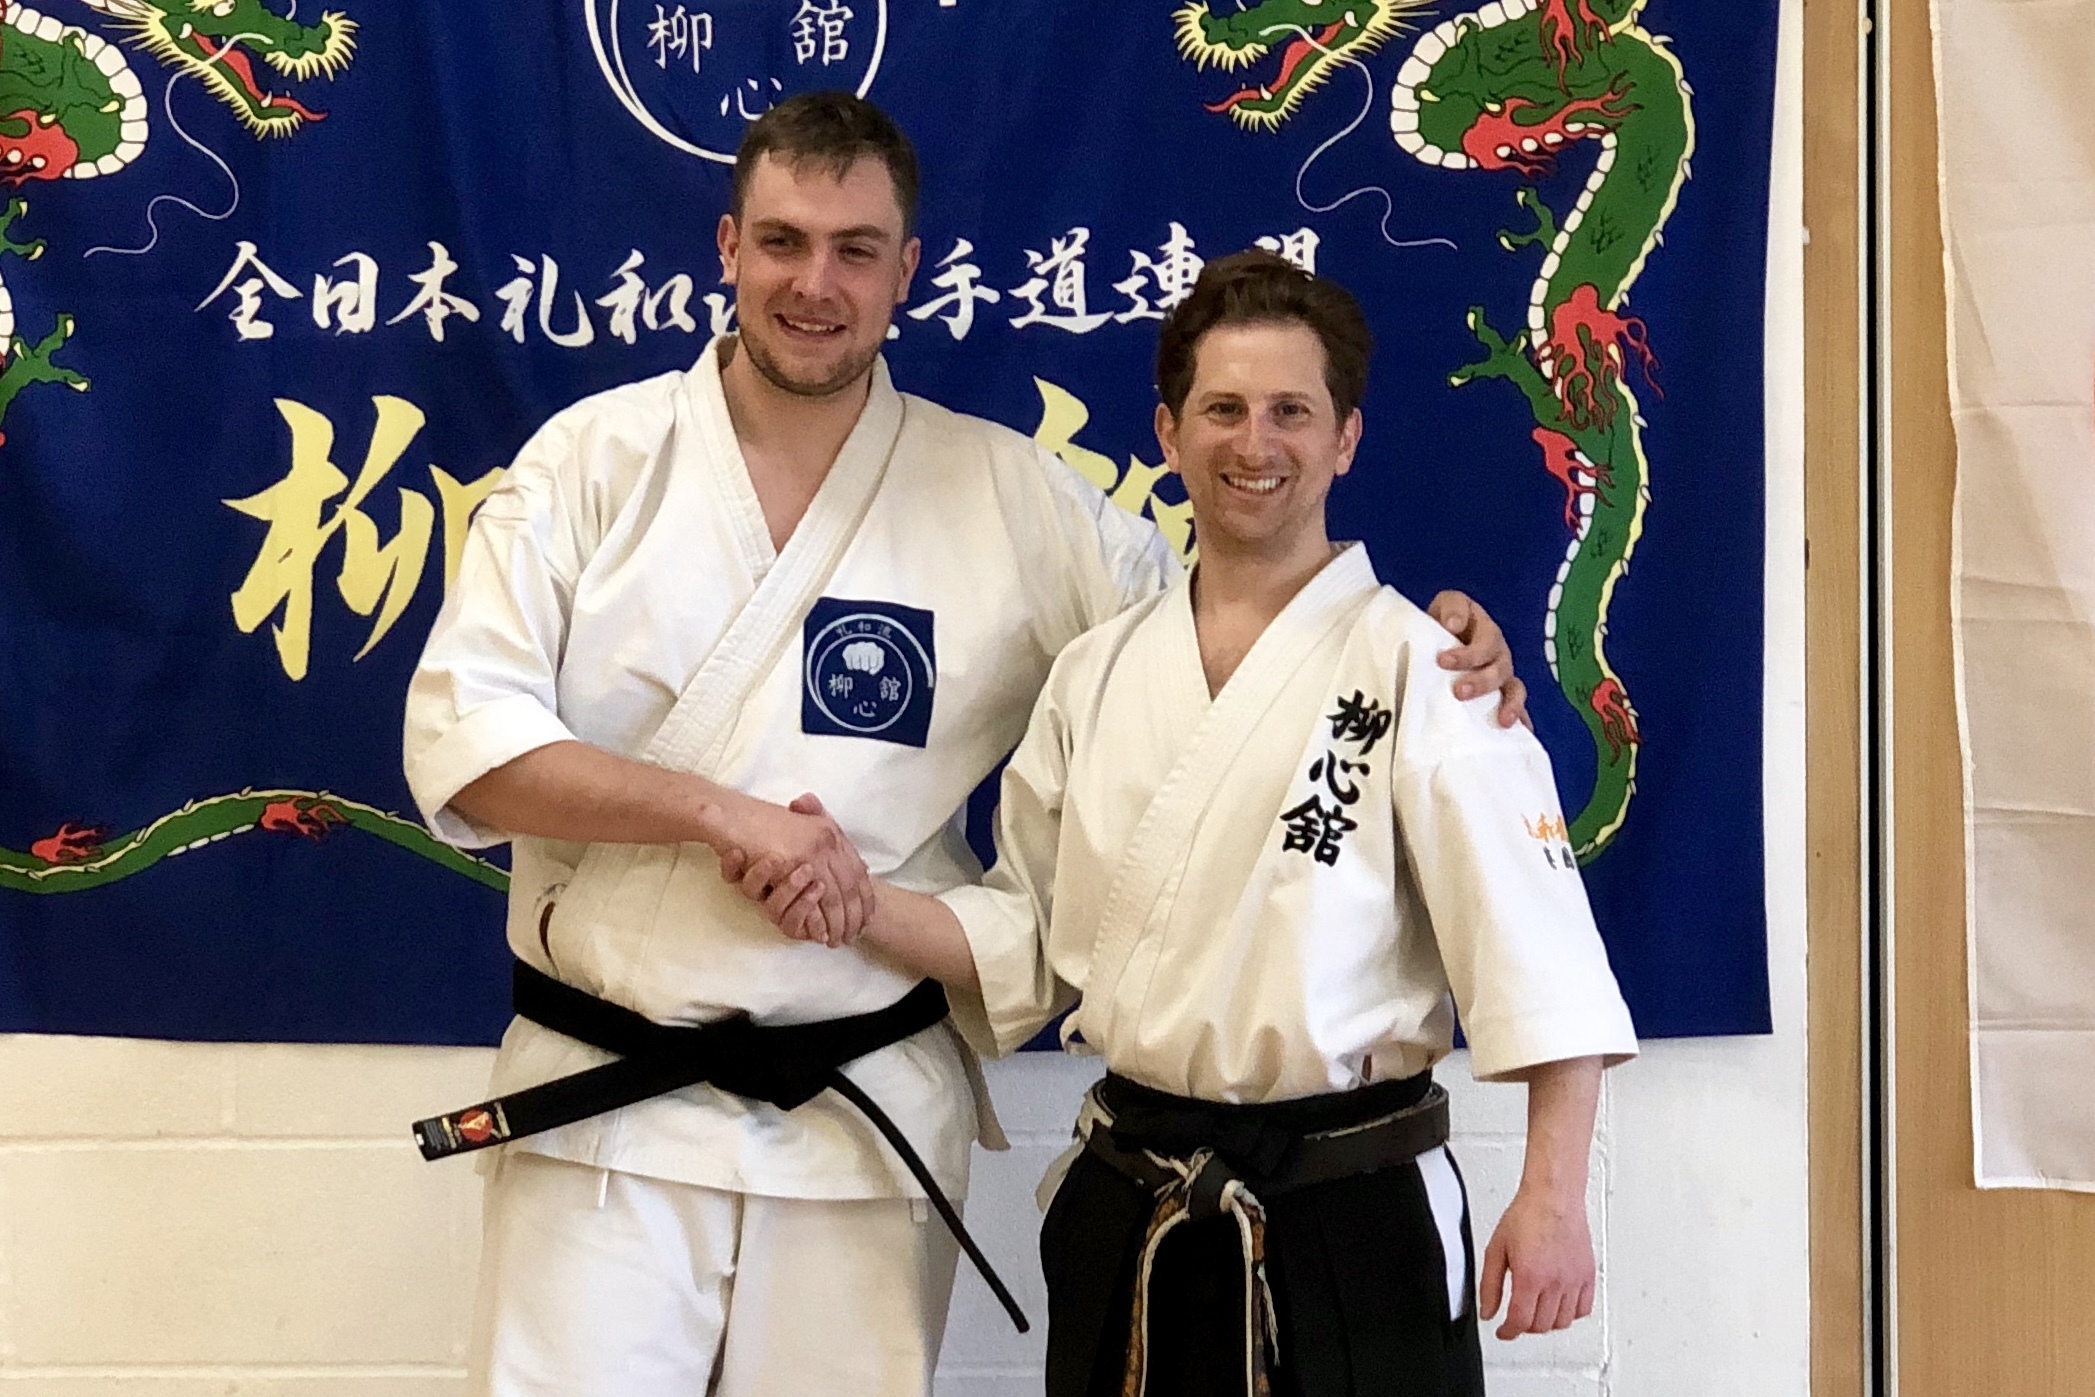 VIDEO: Why Brighton is the perfect place to start my karate school